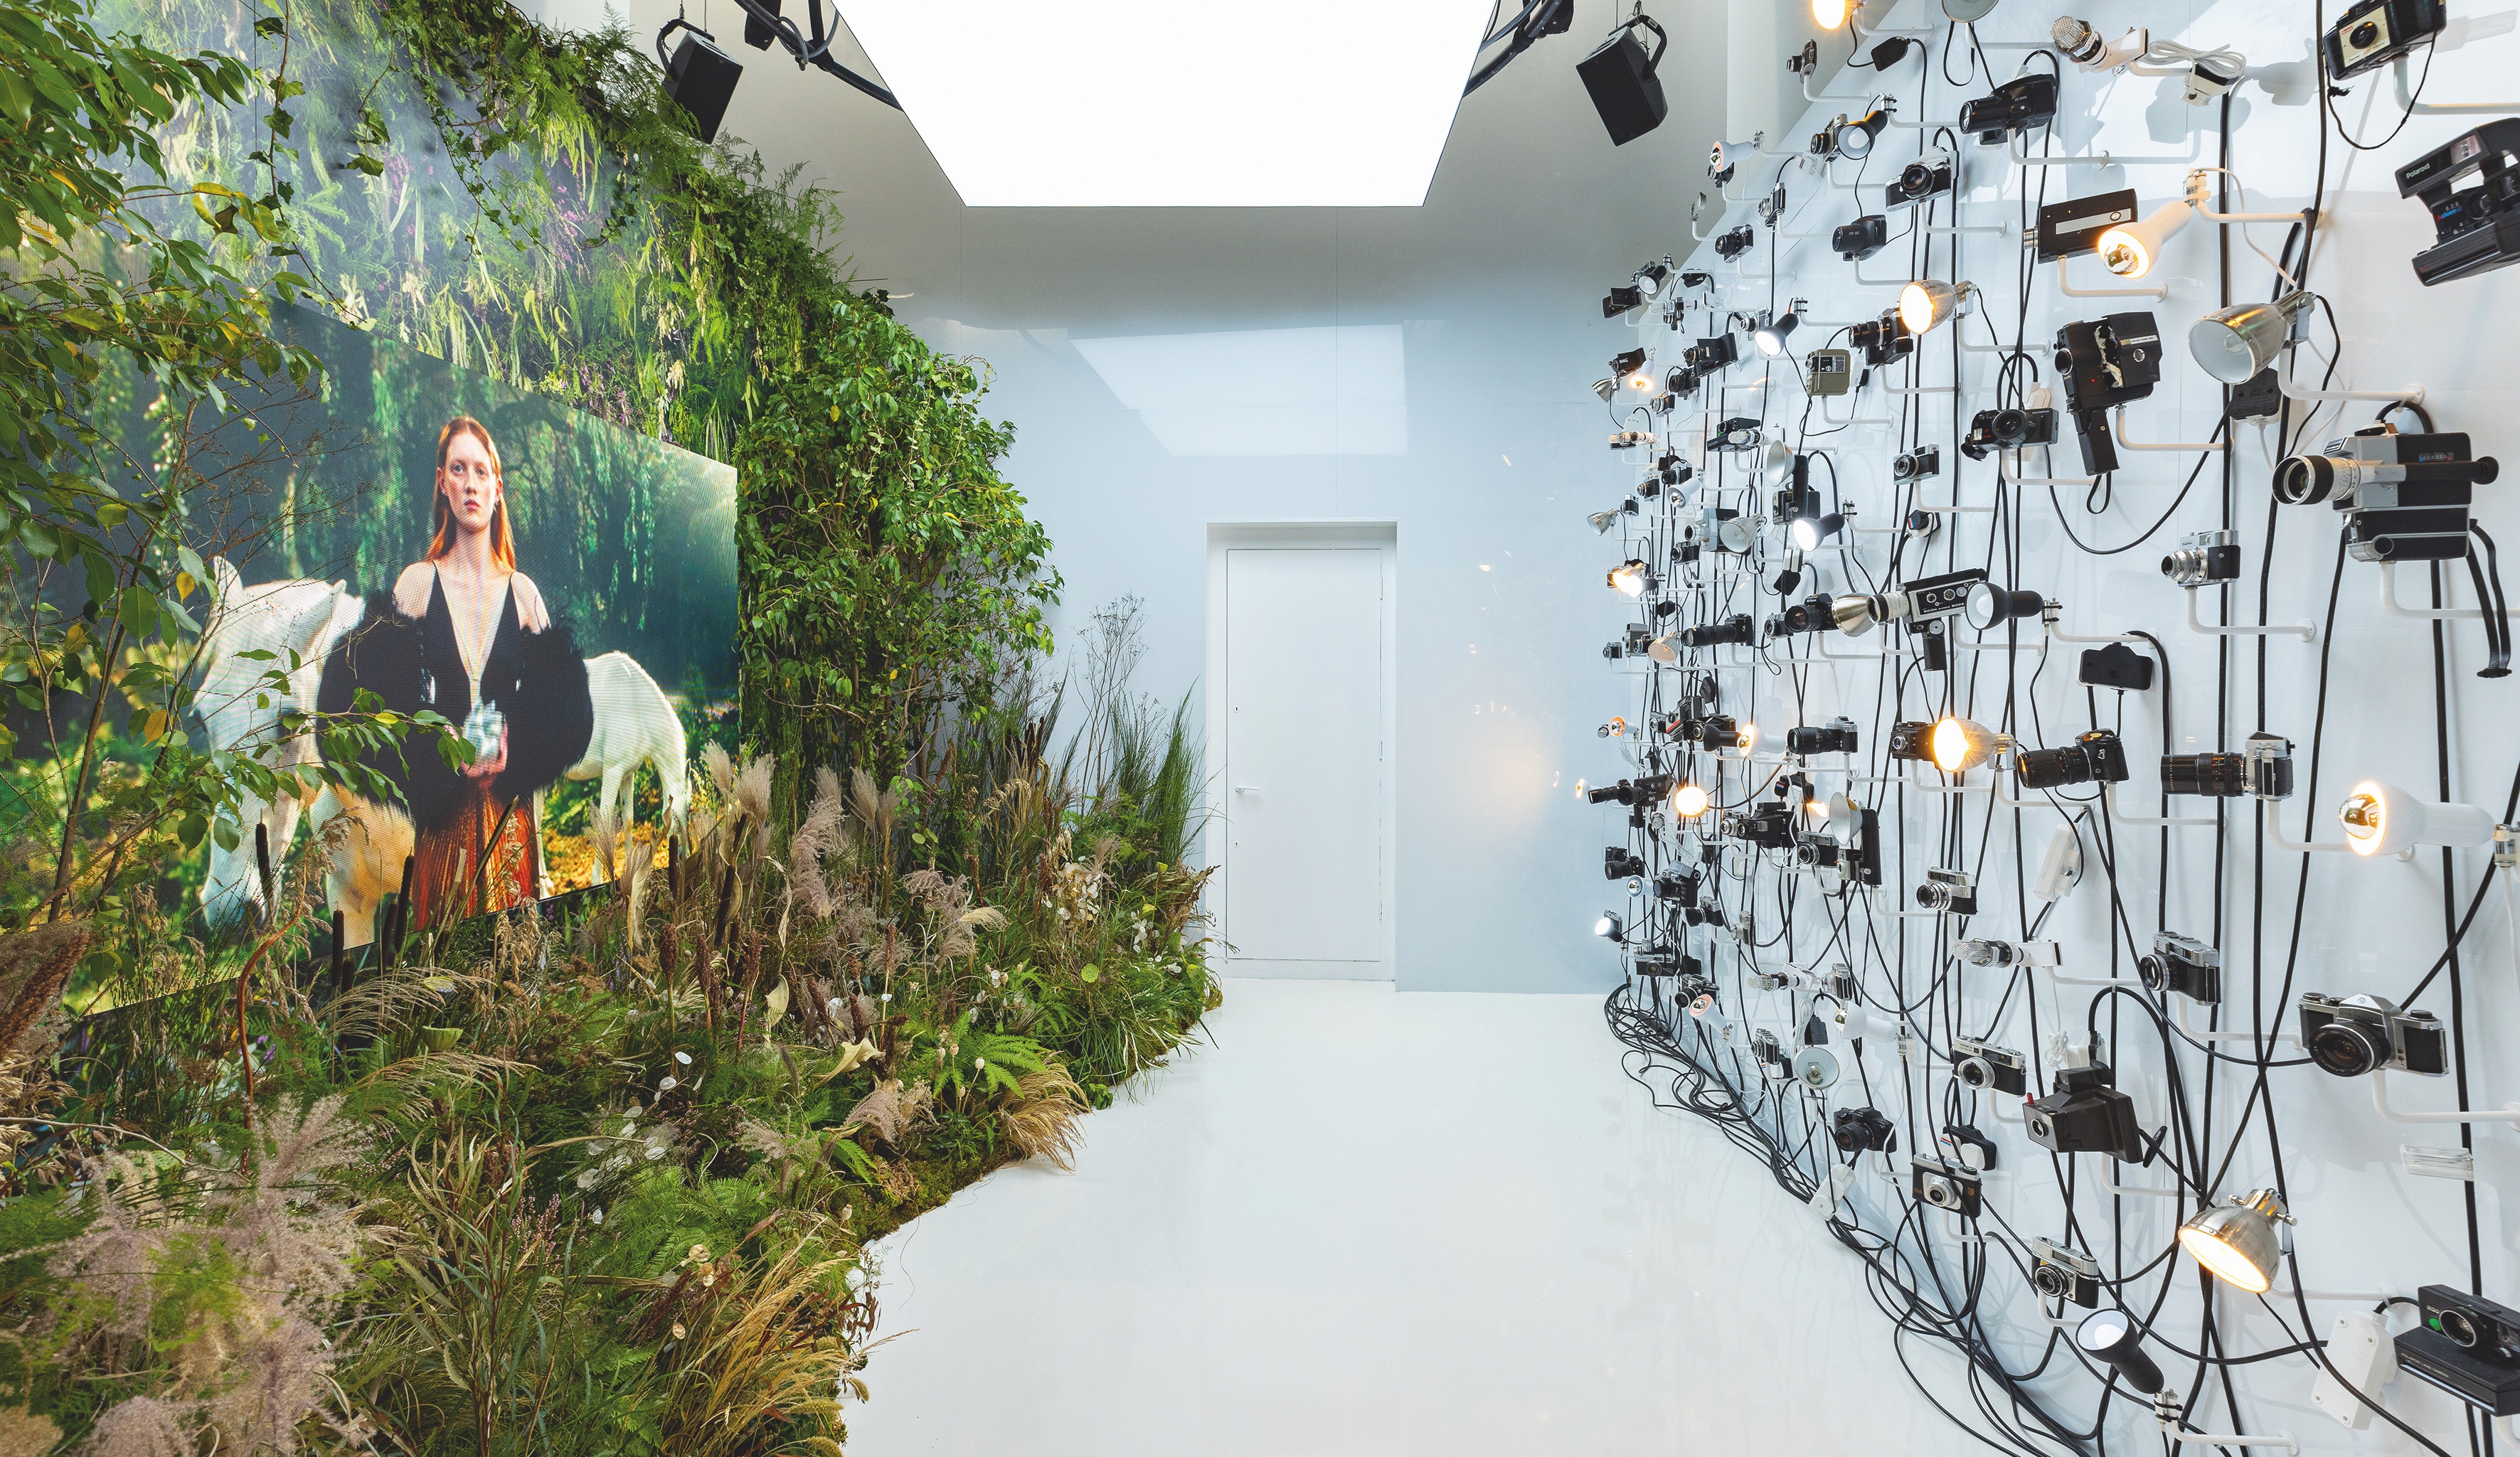 Inside the Gucci Circolo pop up shop with a wall of plants and foliage and on the other side a wall of cameras and lights. 